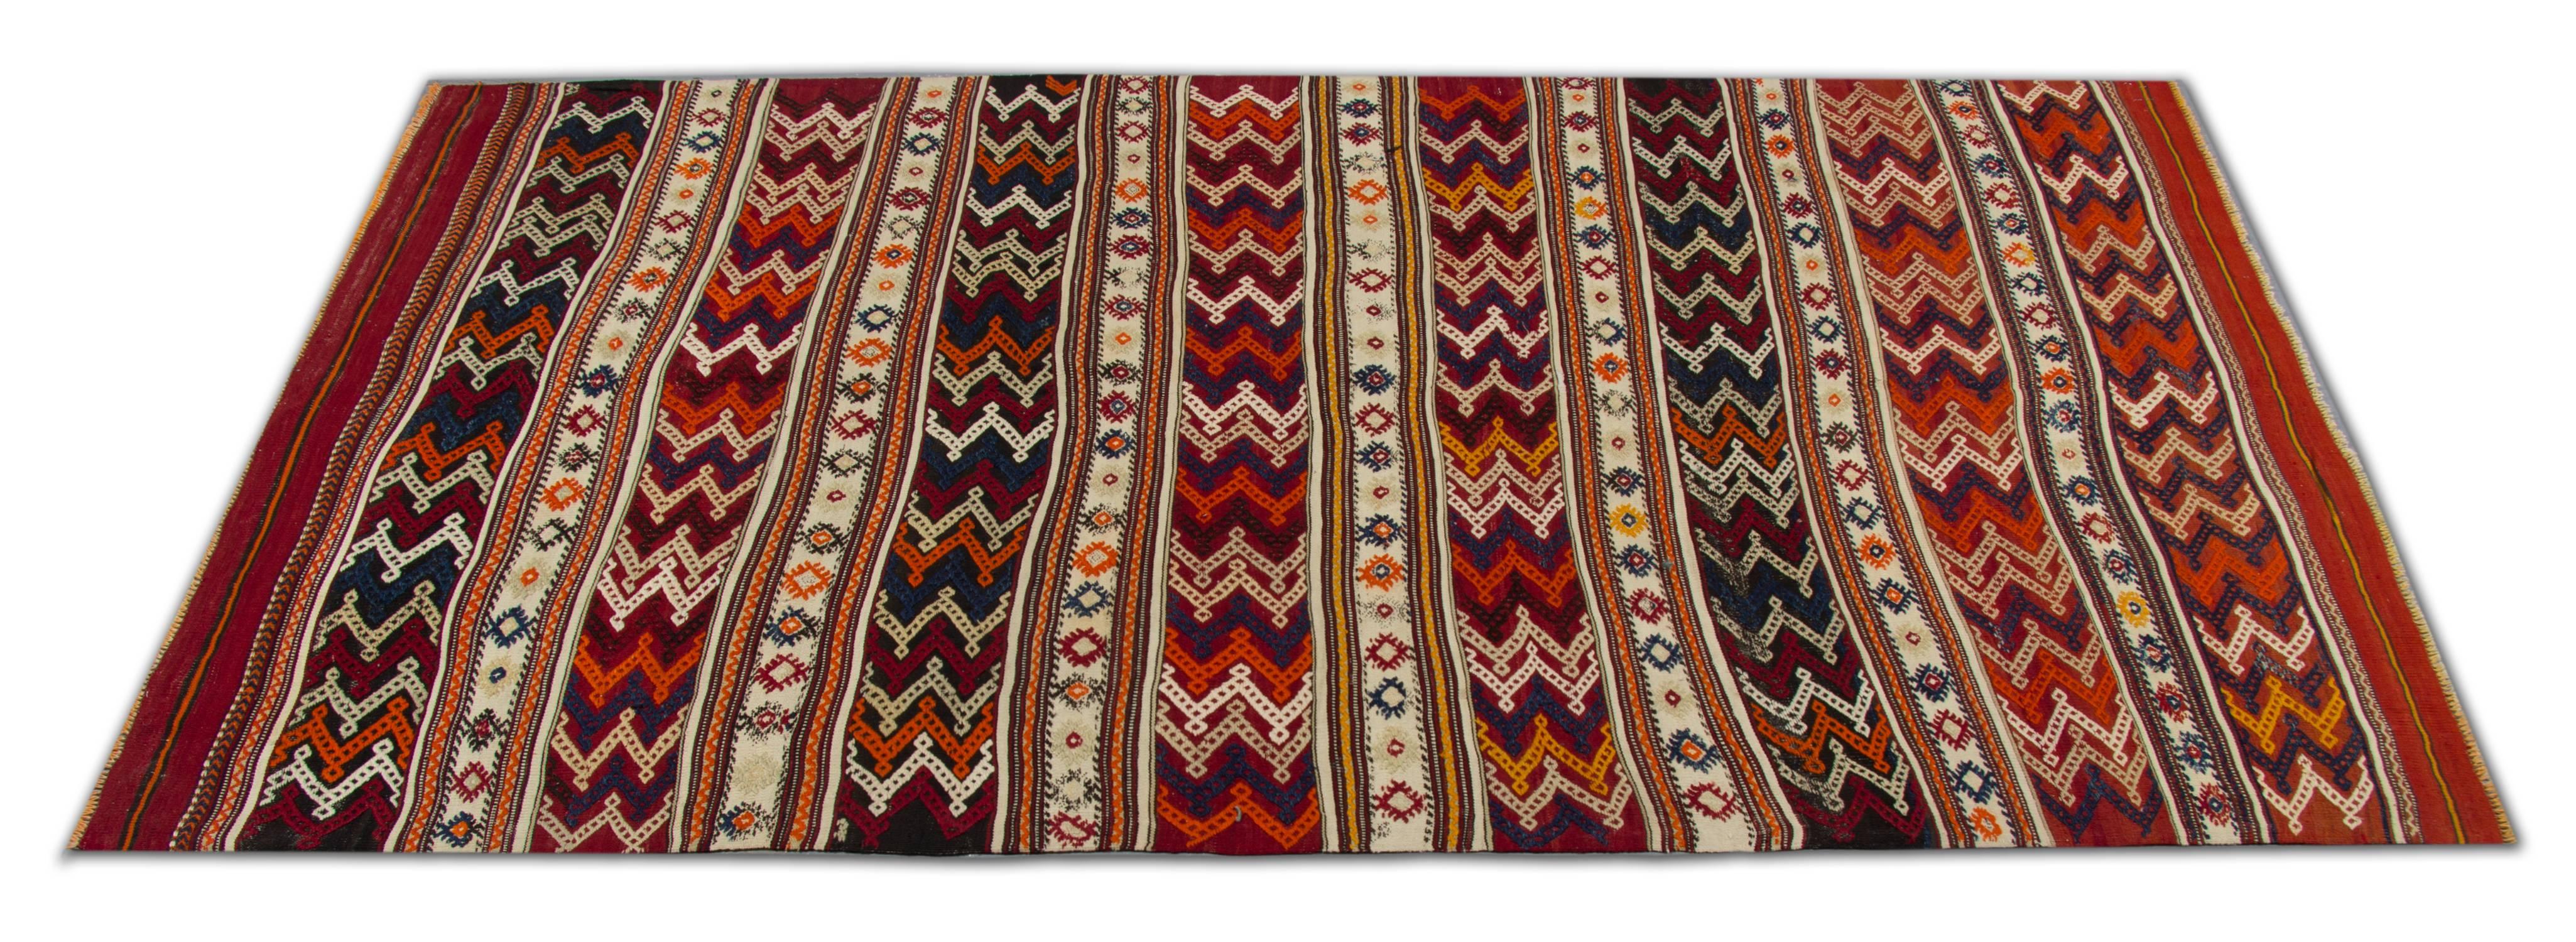 These handmade carpet antique rugs for sale are from Konya has located in the heart of Turkey, workshop Kilims of Konya are mostly known for their distinctive geometric designs oriental rug. These decorative rugs are kind of Kilims can very good